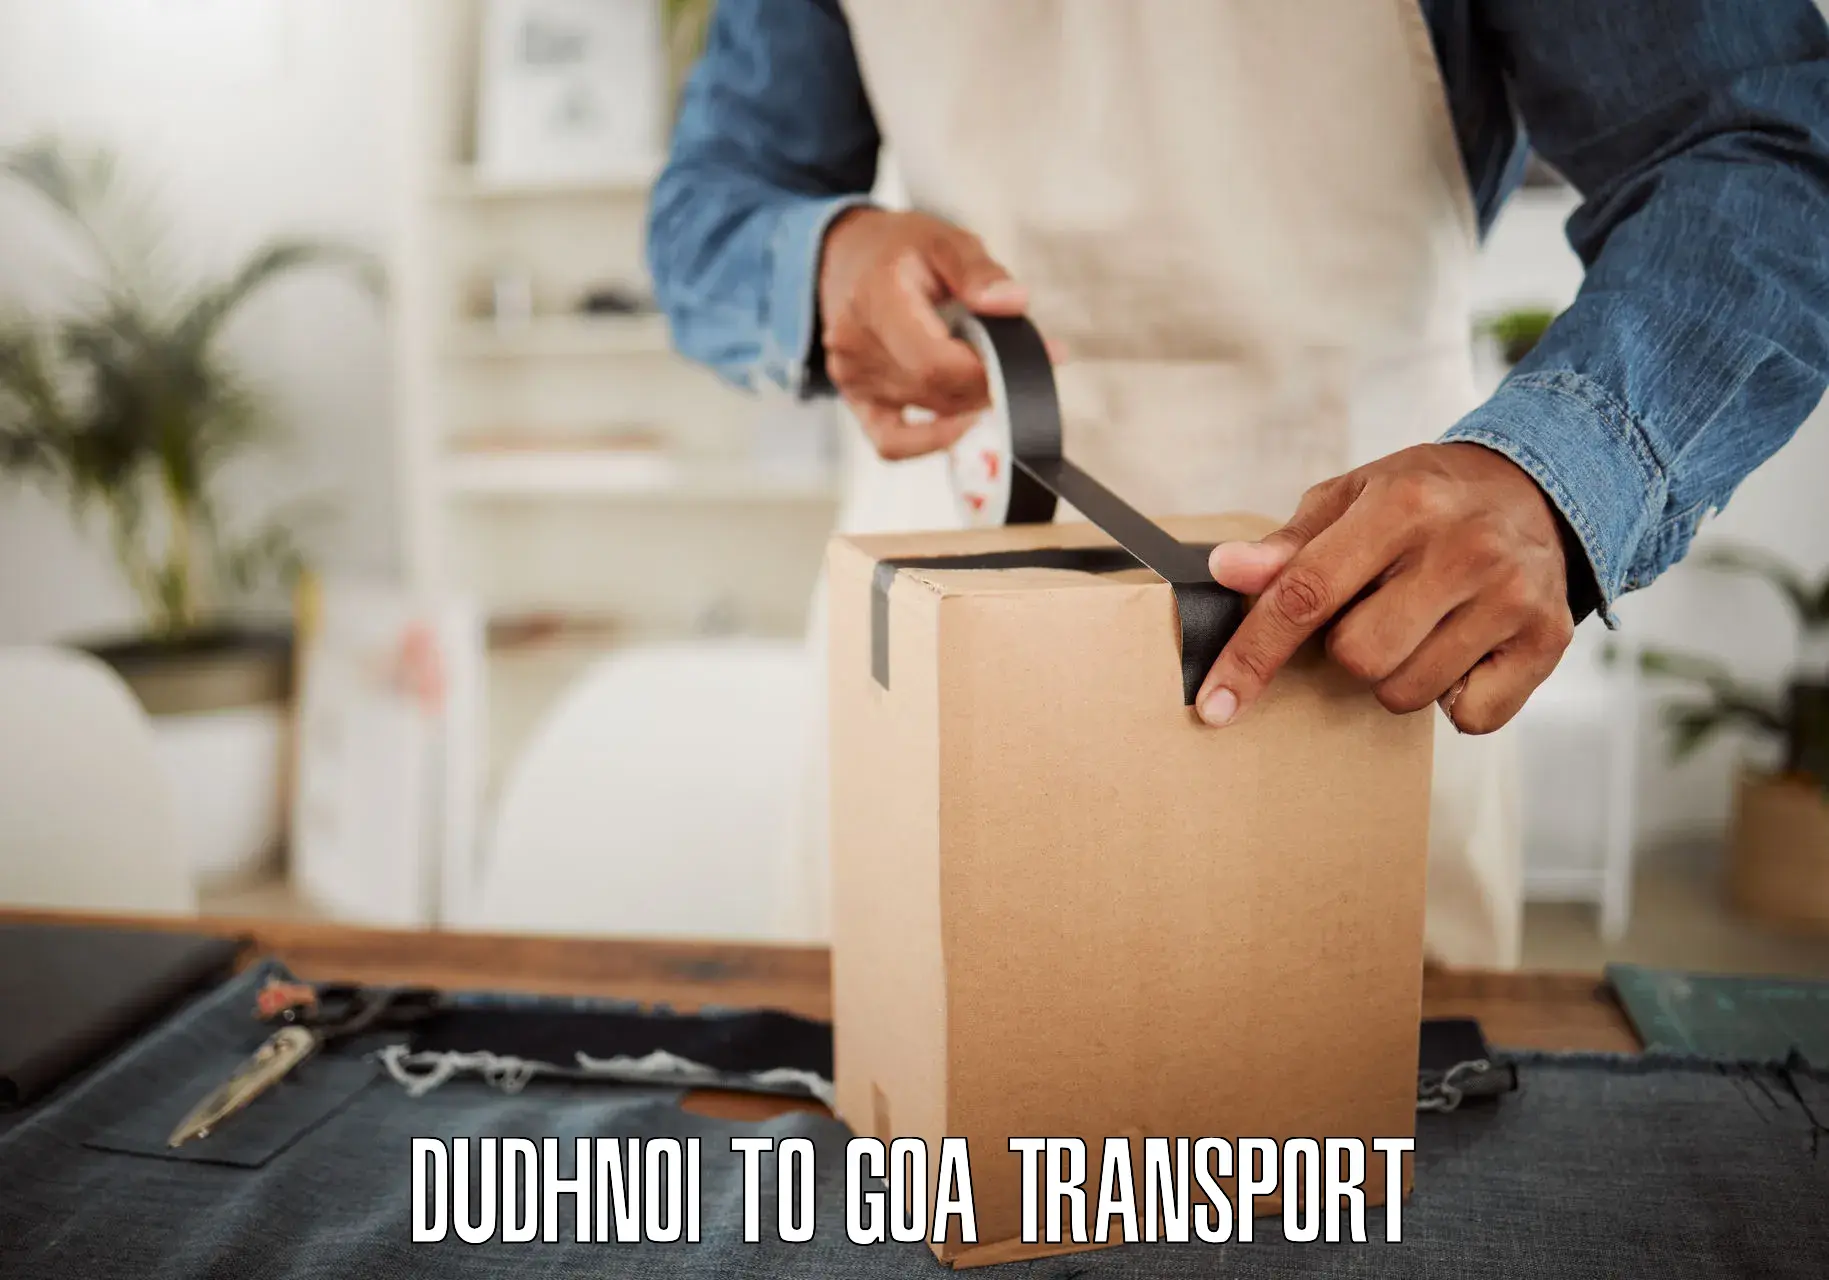 Truck transport companies in India Dudhnoi to Goa